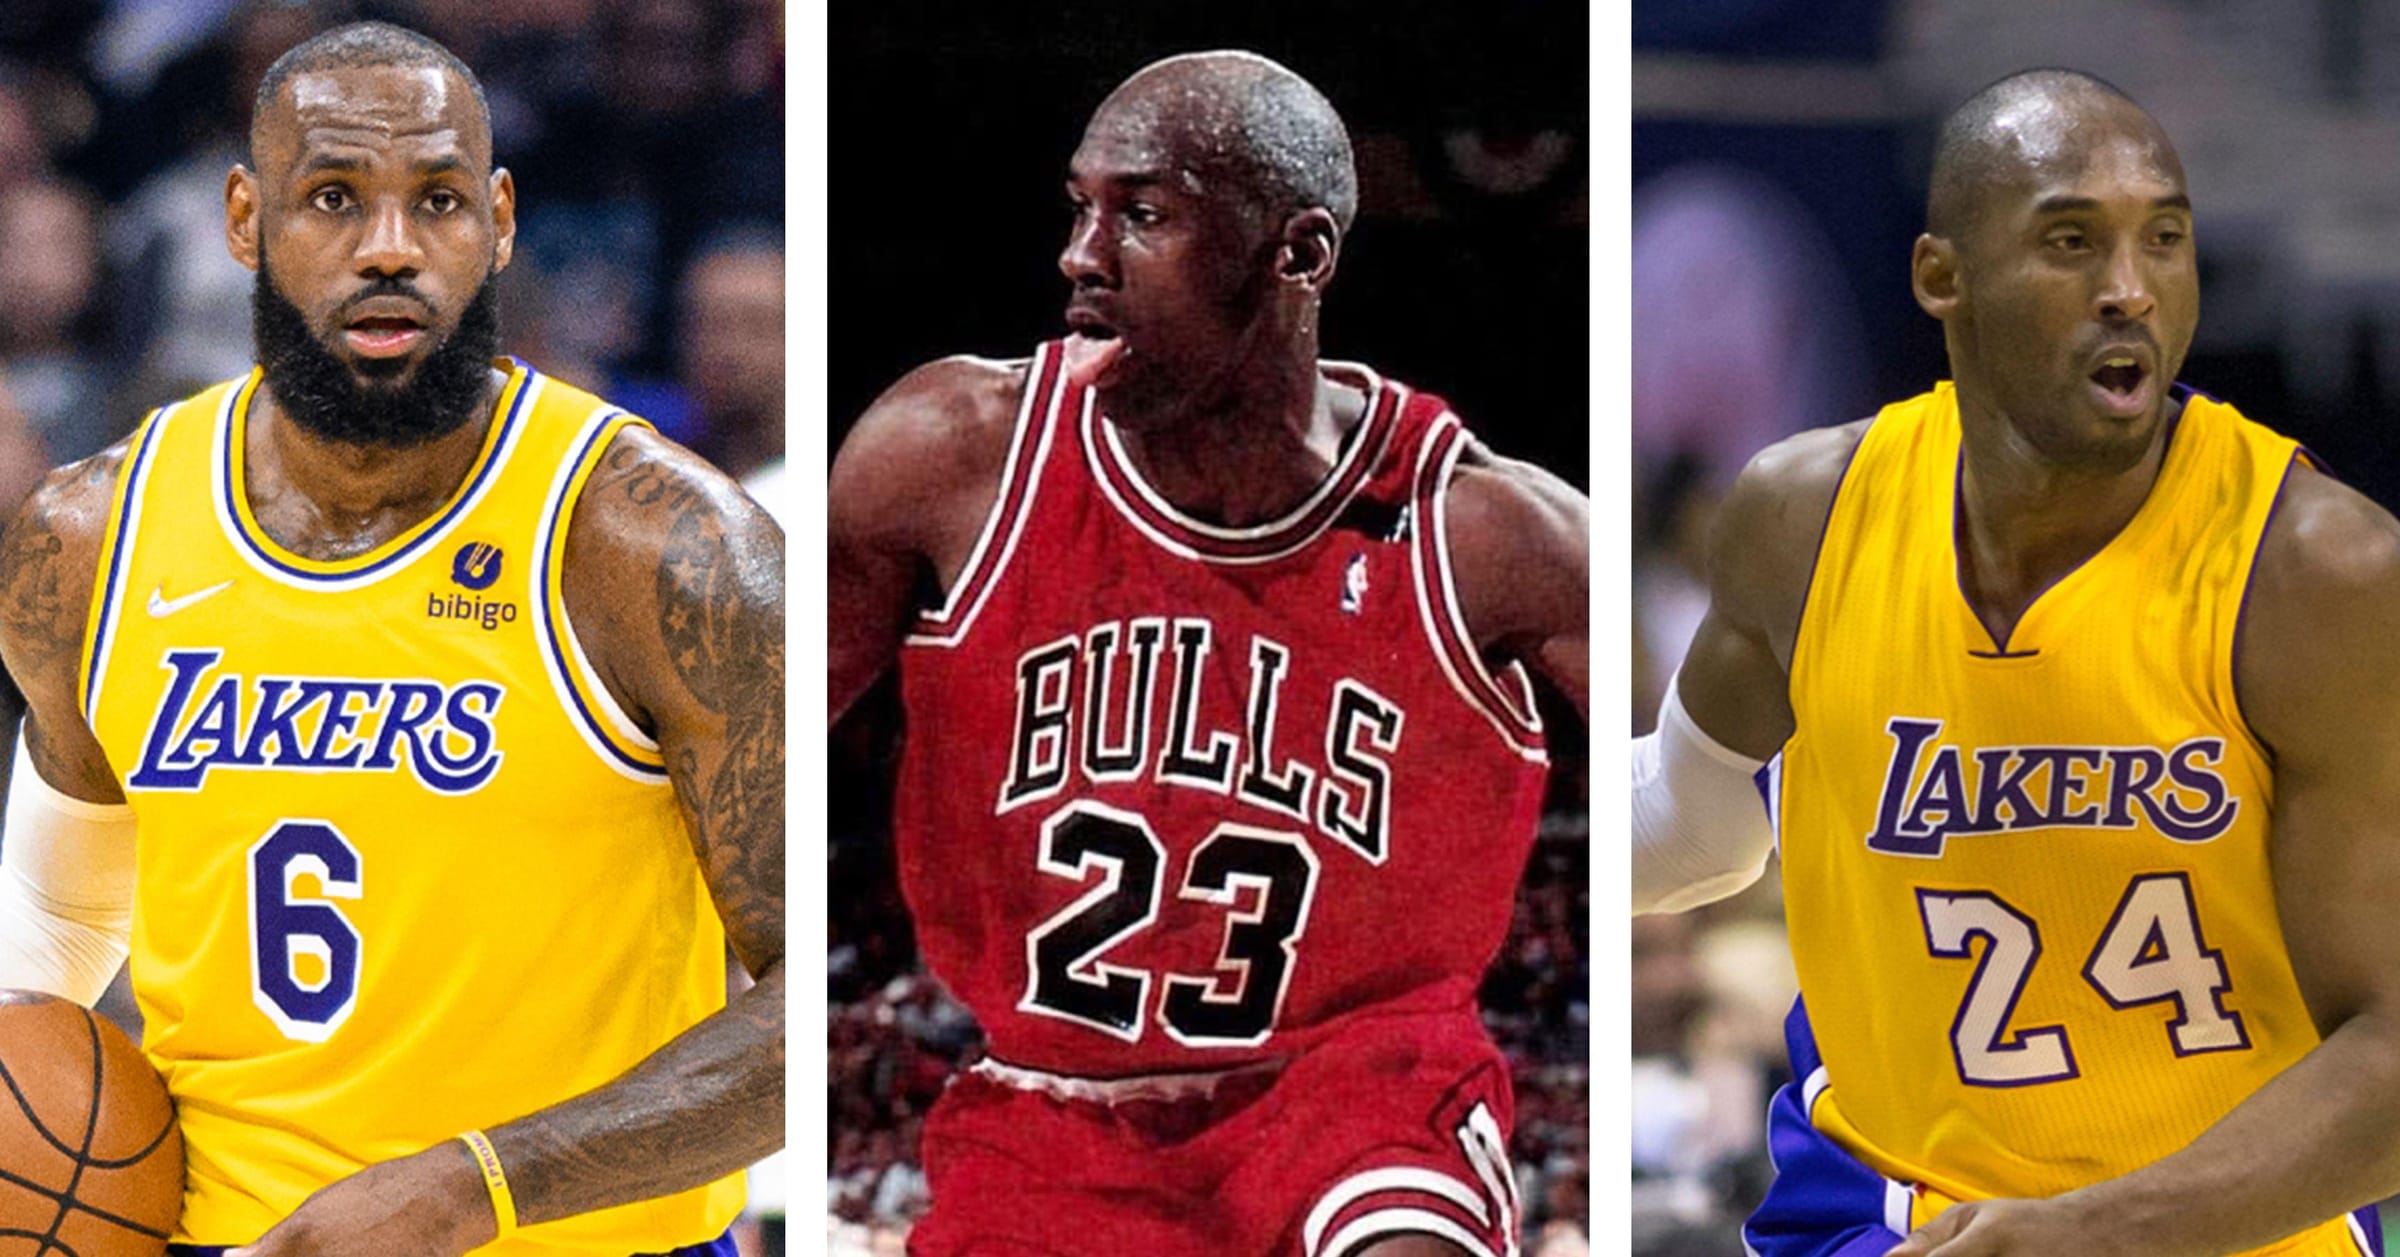 Ranking the top 10 players in NBA history - find out if your pick